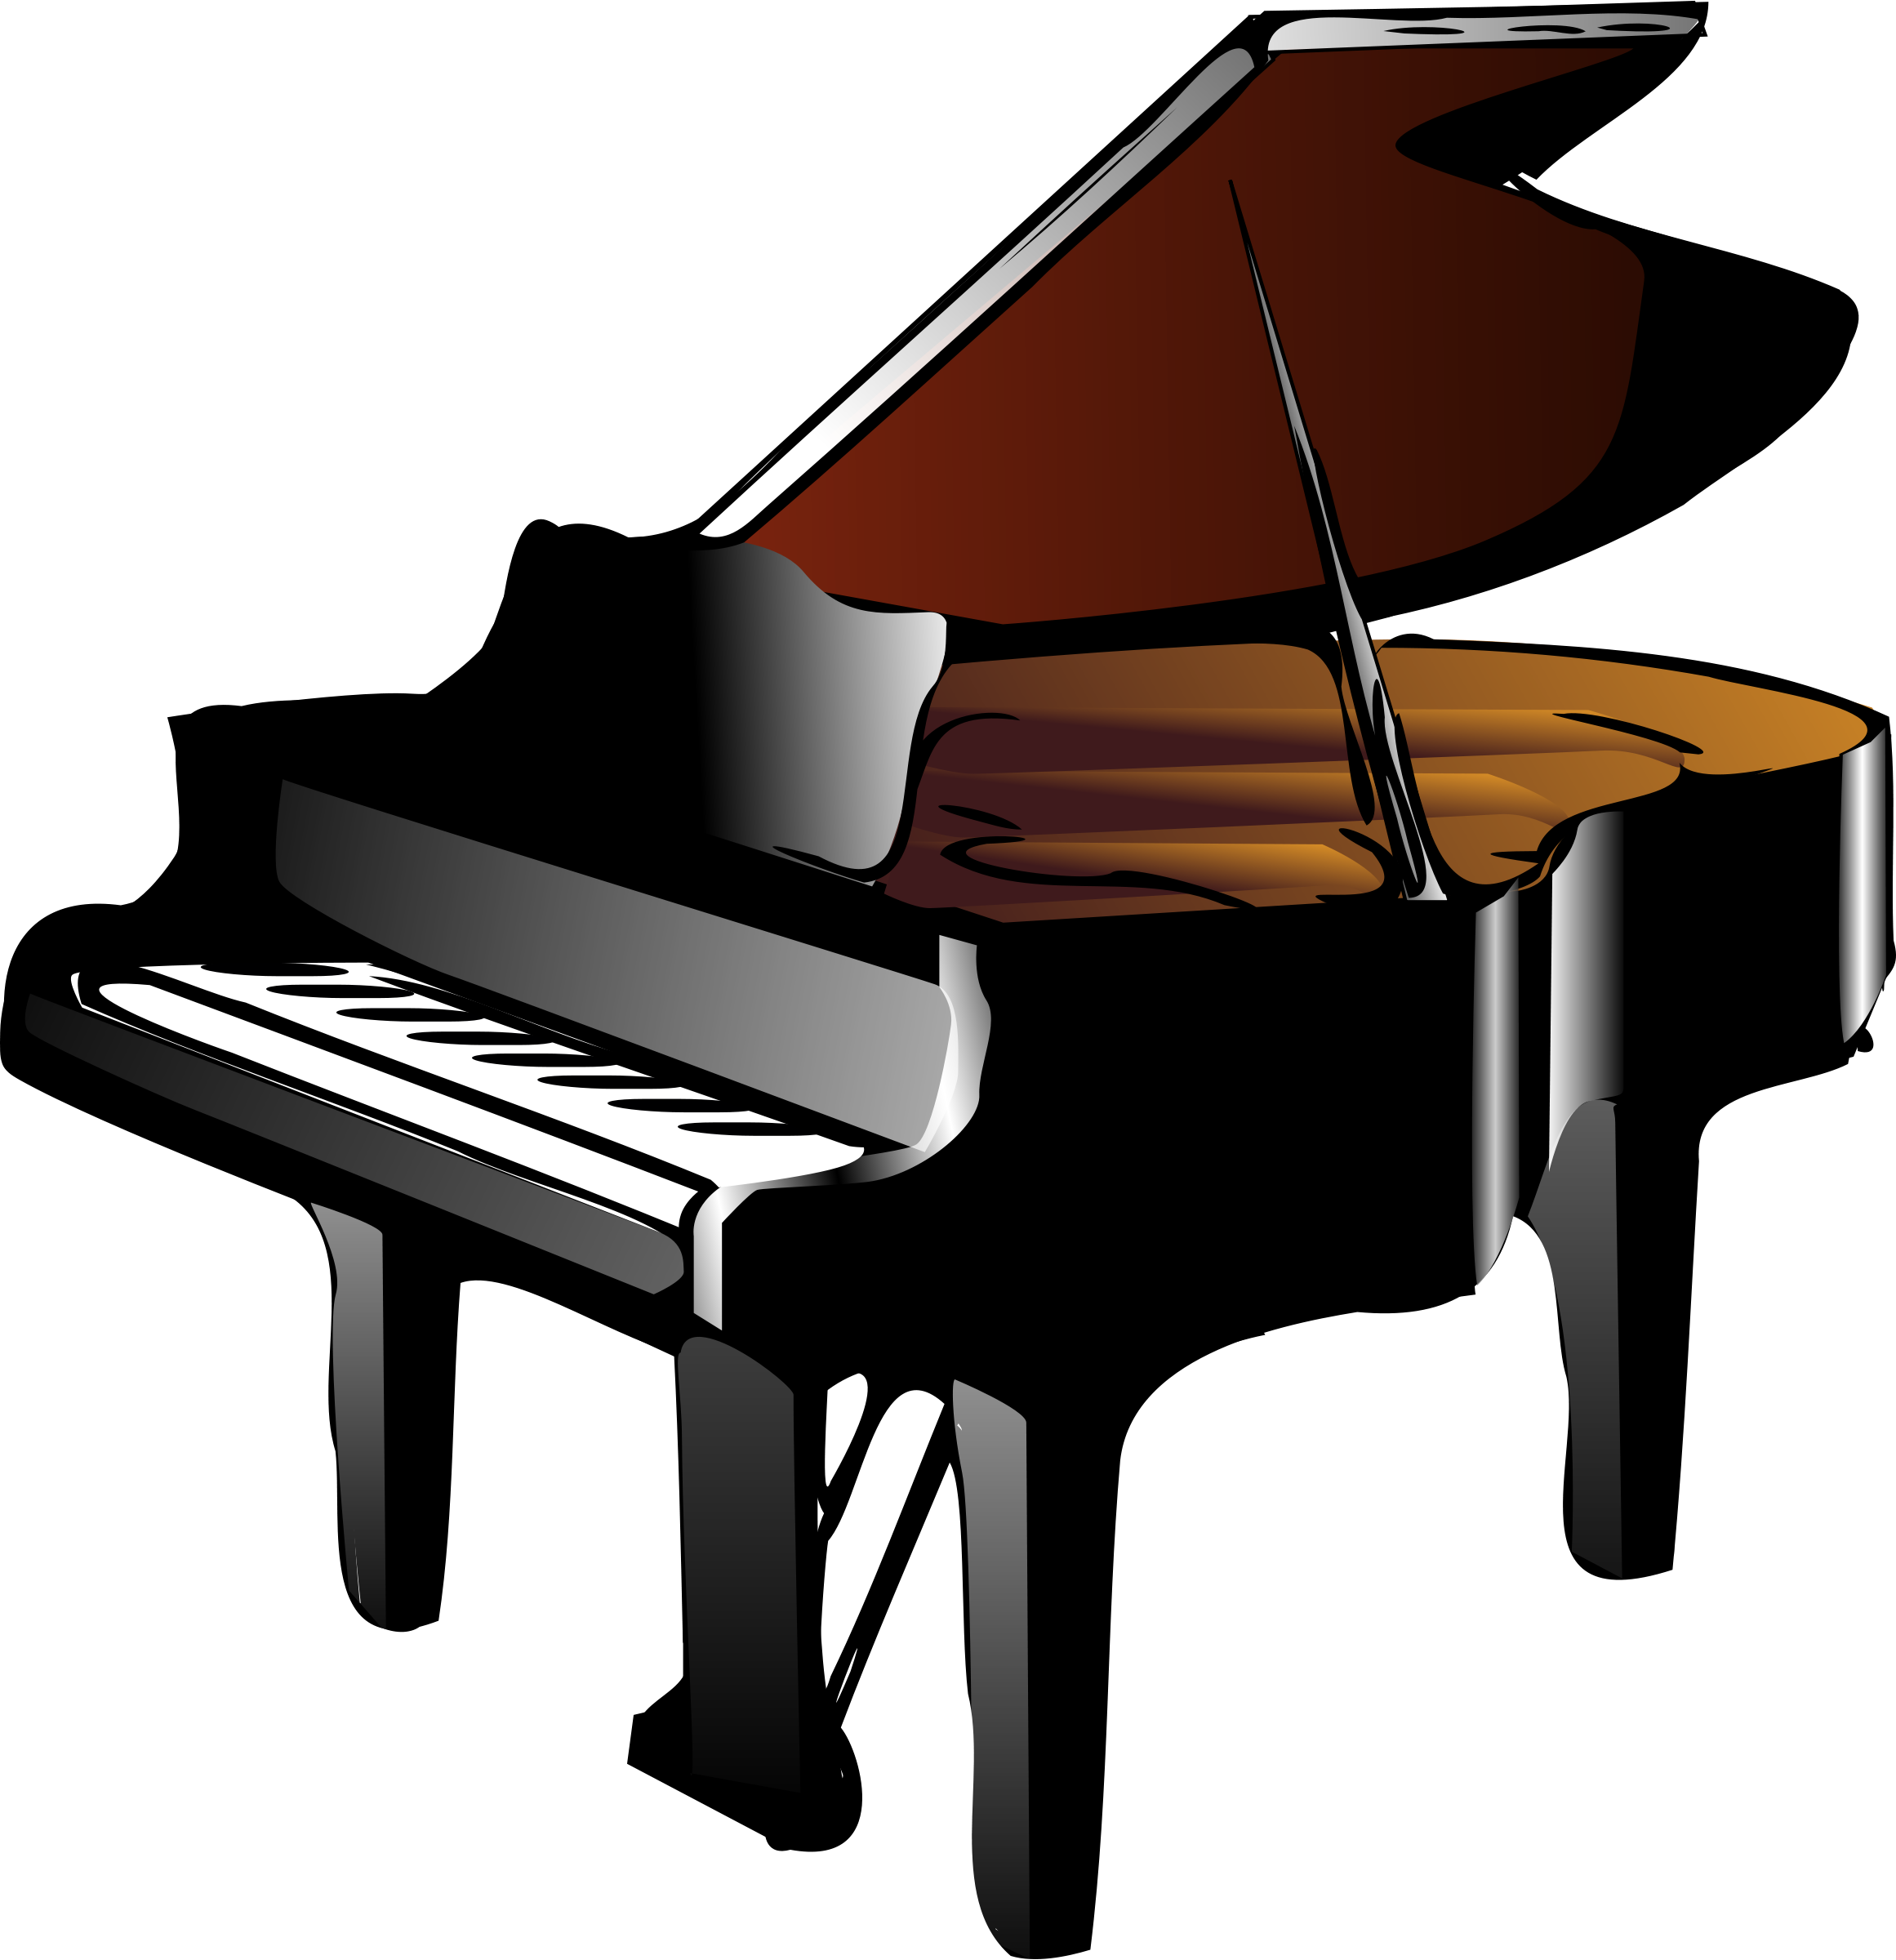 Piano clipart free download on WebStockReview